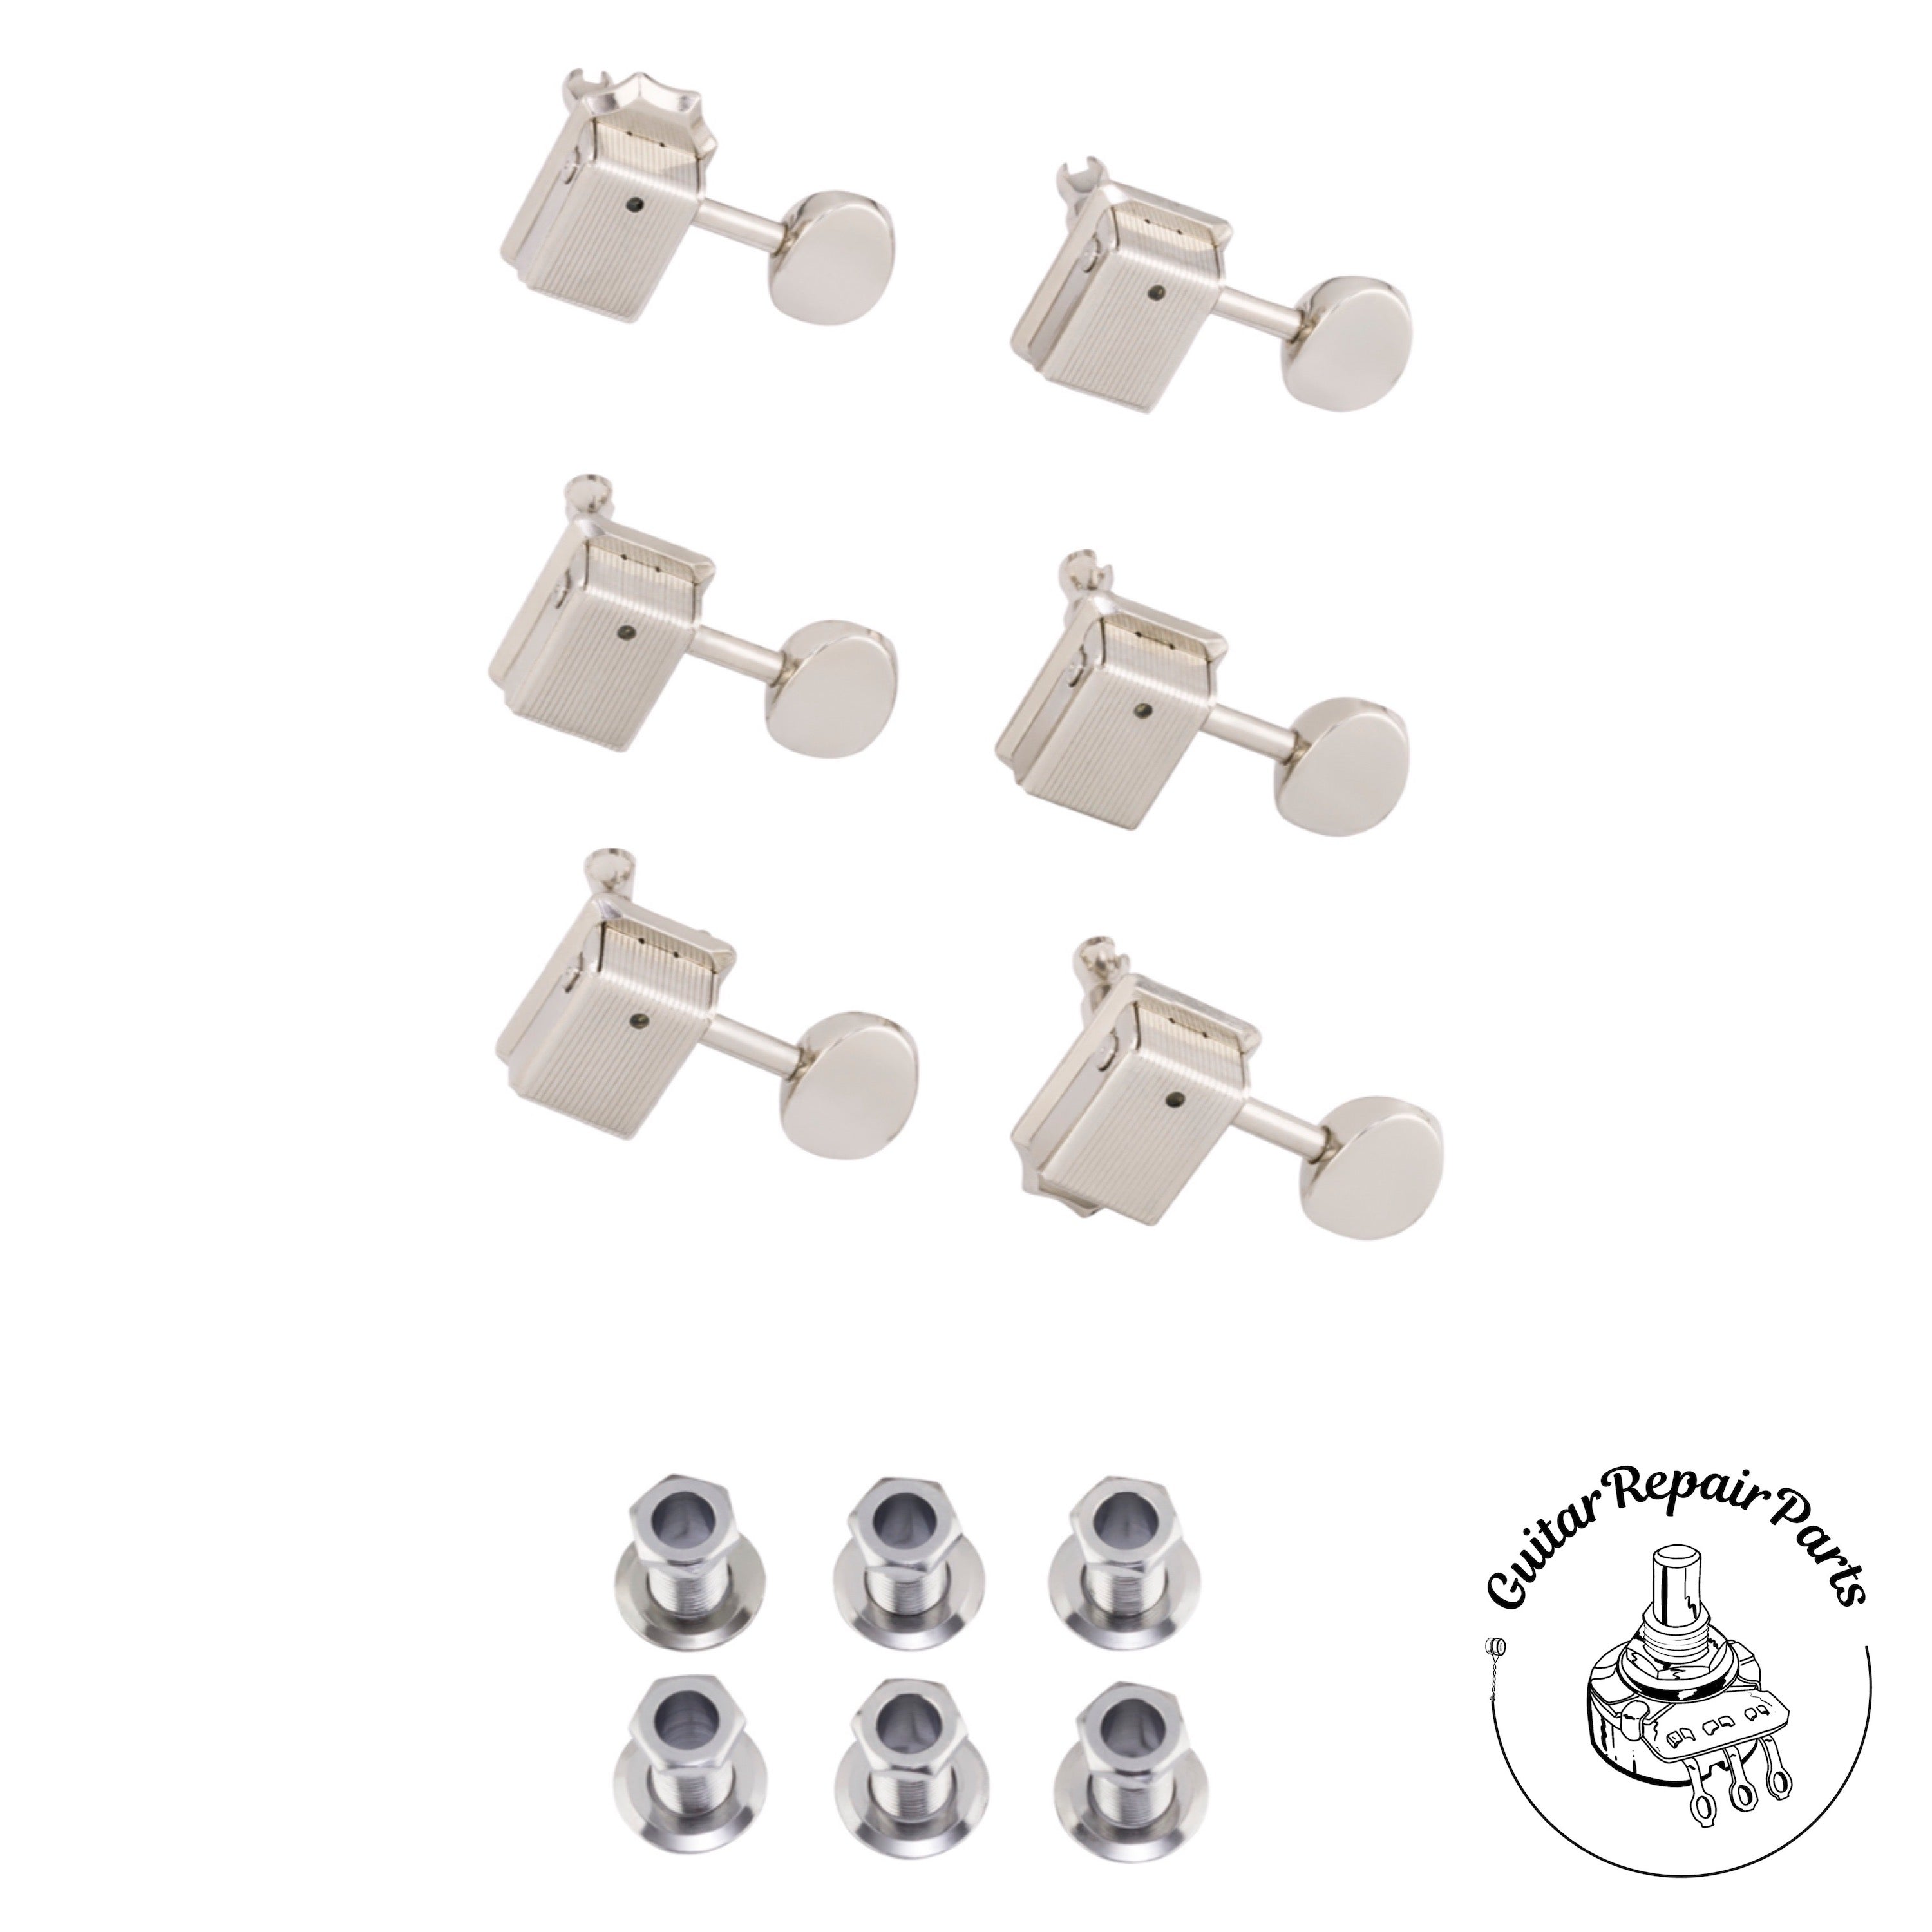 Fender ClassicGear Vintage Style 2-pin Mount Tuning Machines 0990802100